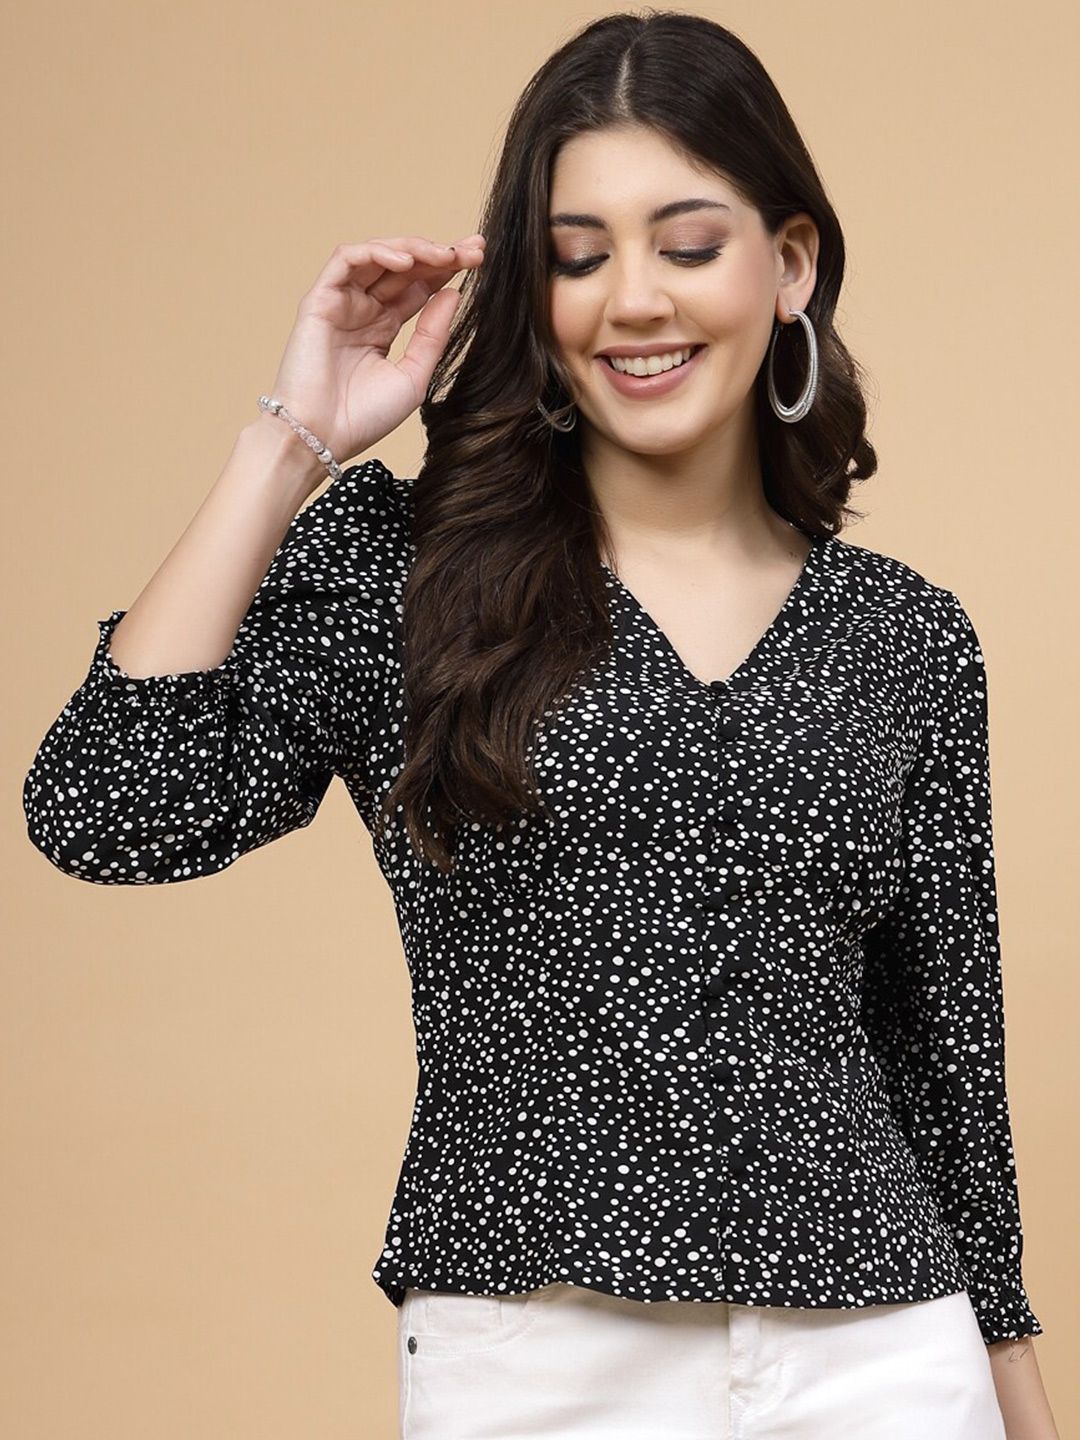 RAASSIO Polka Dot Printed V-Neck Pleated Crepe Shirt Style Top Price in India